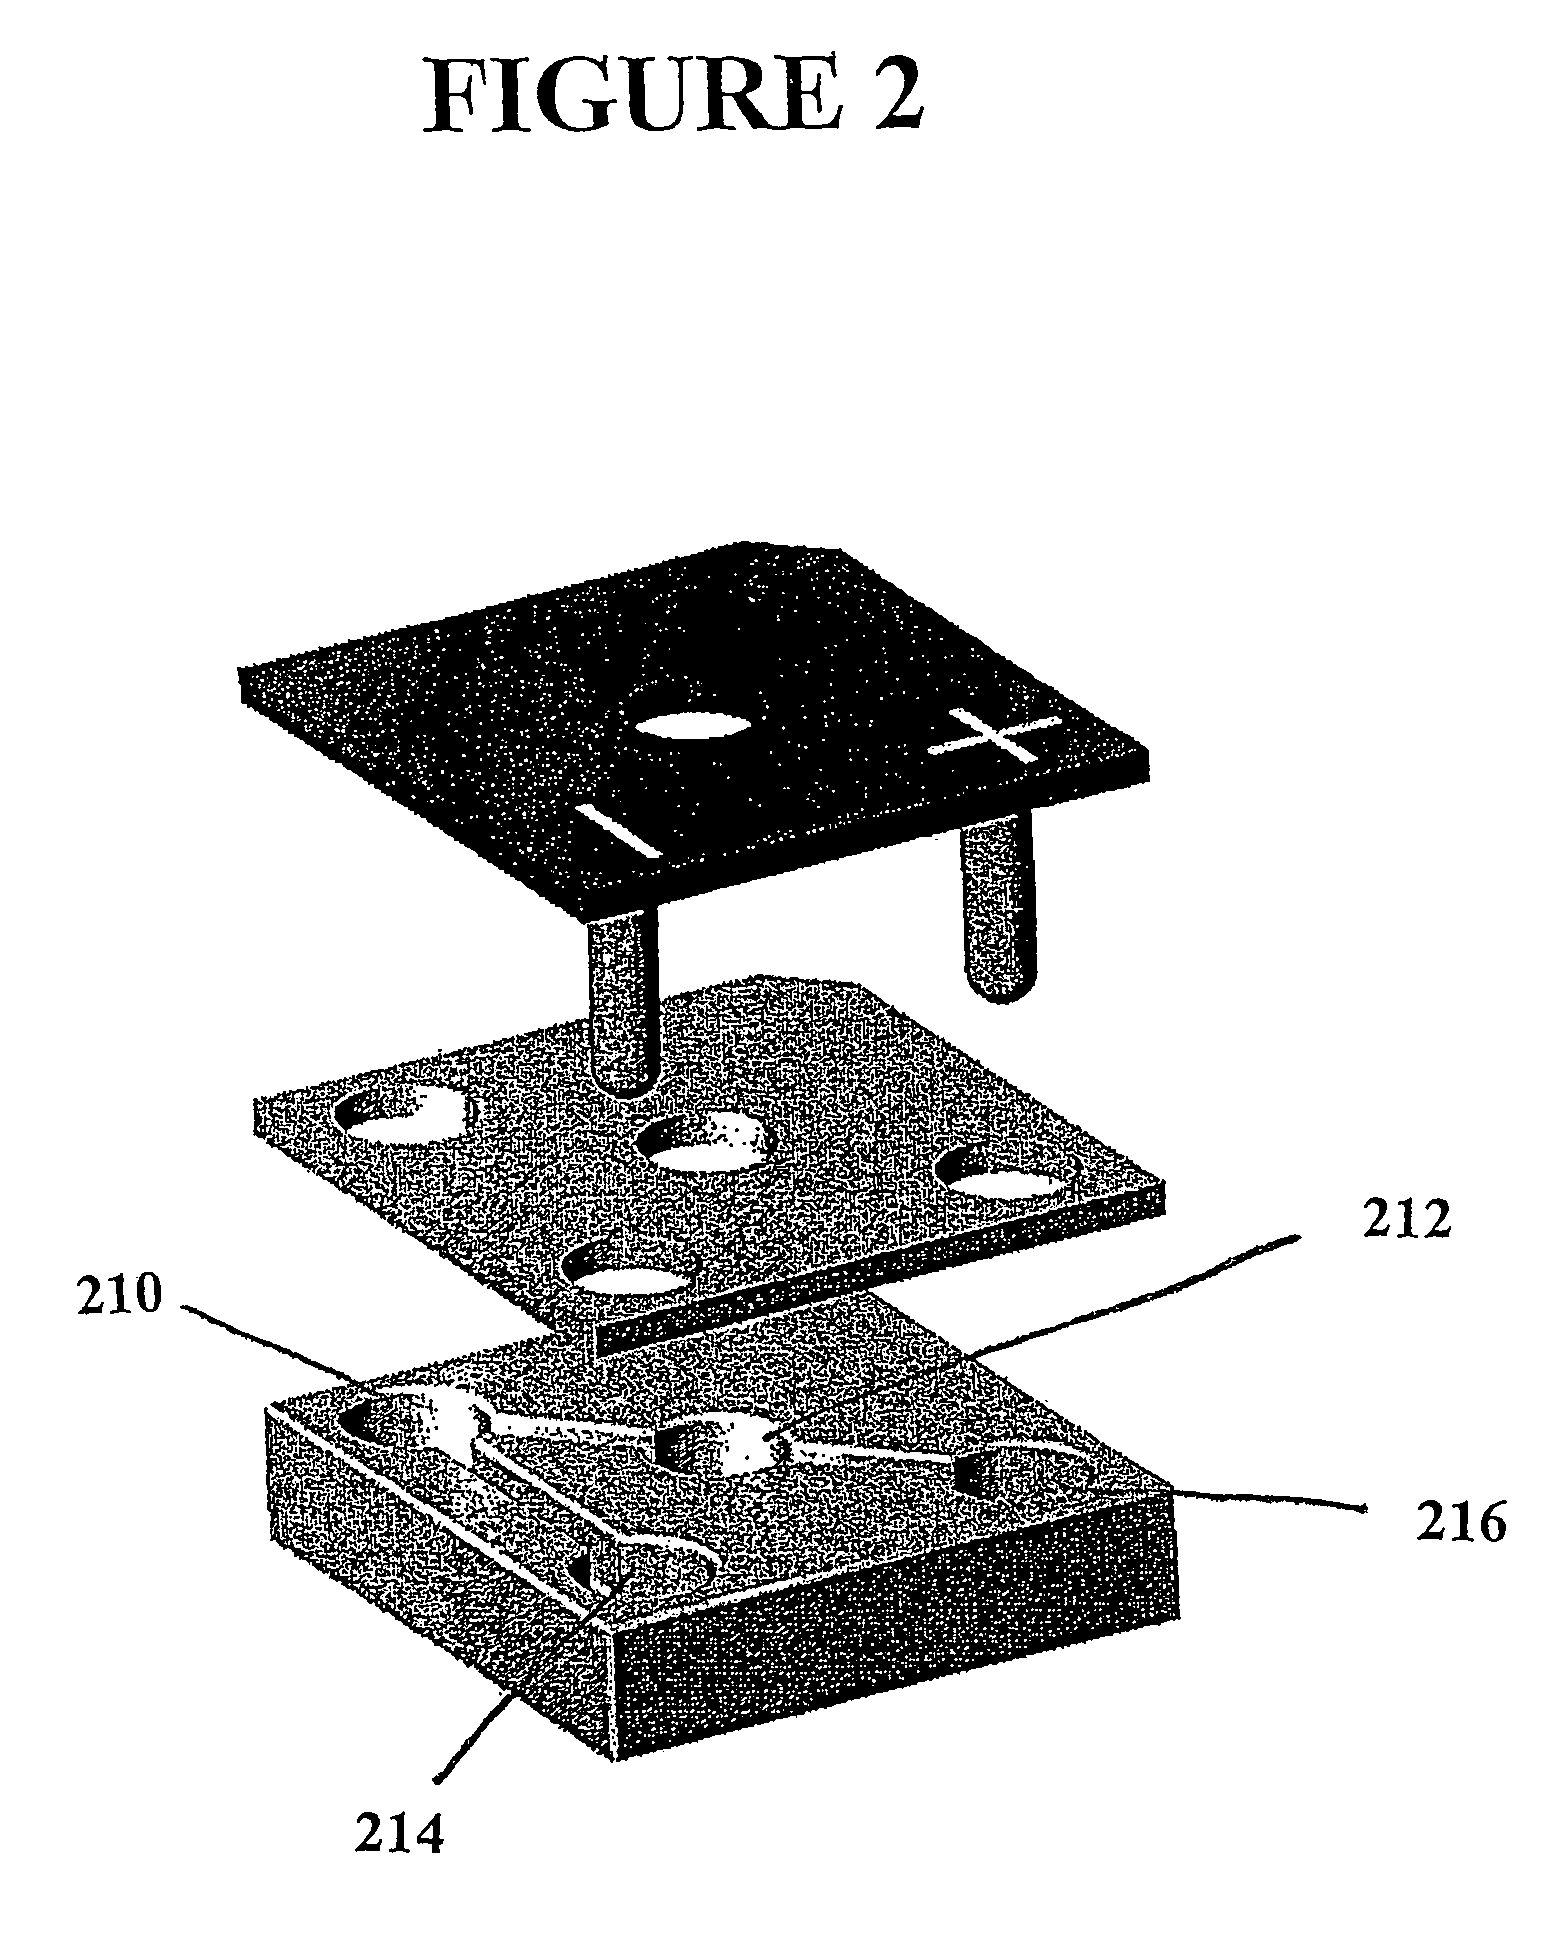 Microstructure apparatus and method for separating differently charged molecules using an applied electric field